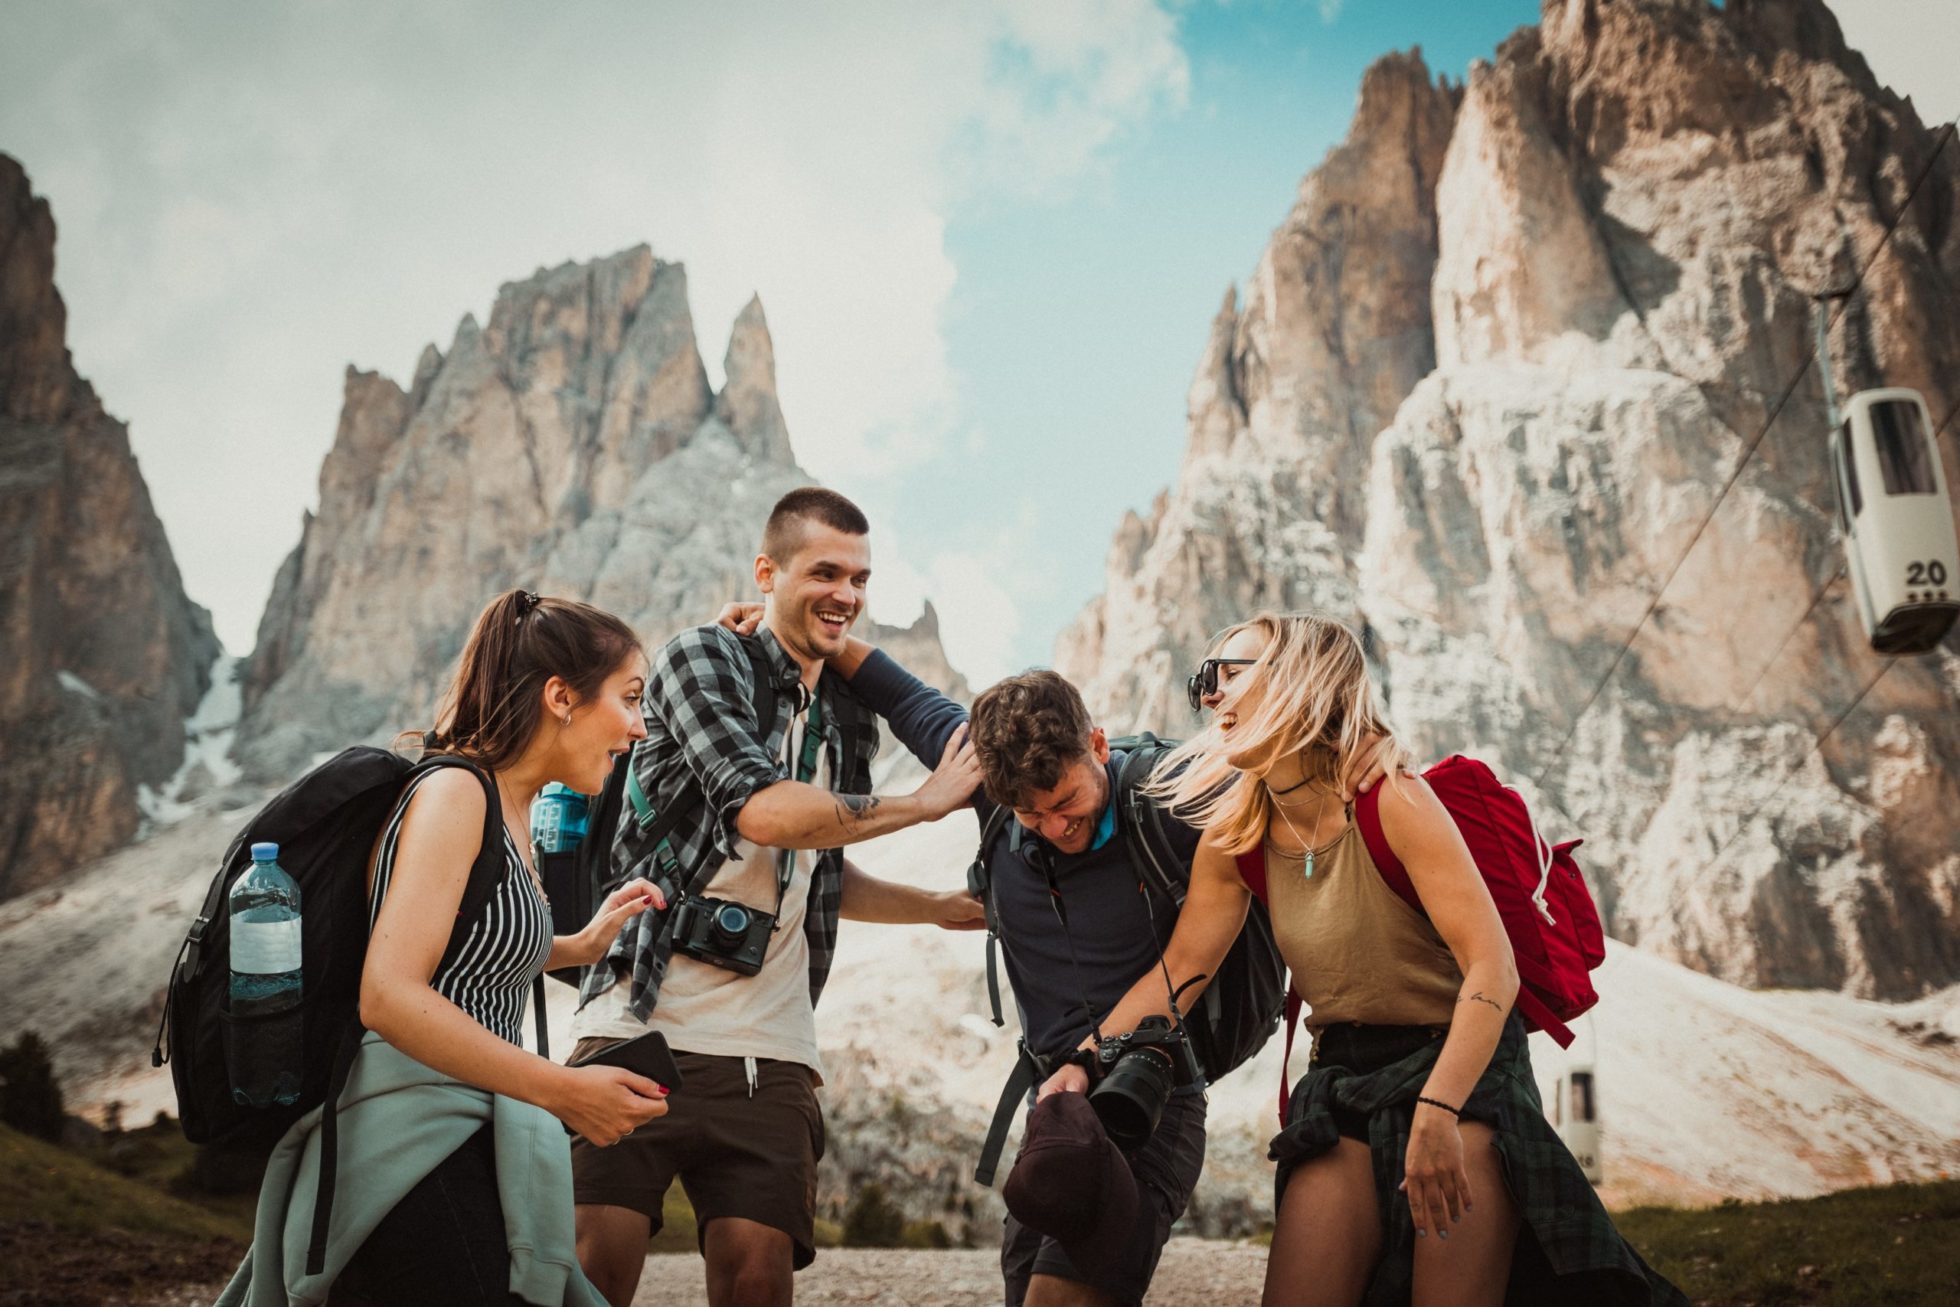 Start to Backpacker: a guide to support autonomous youth tourism